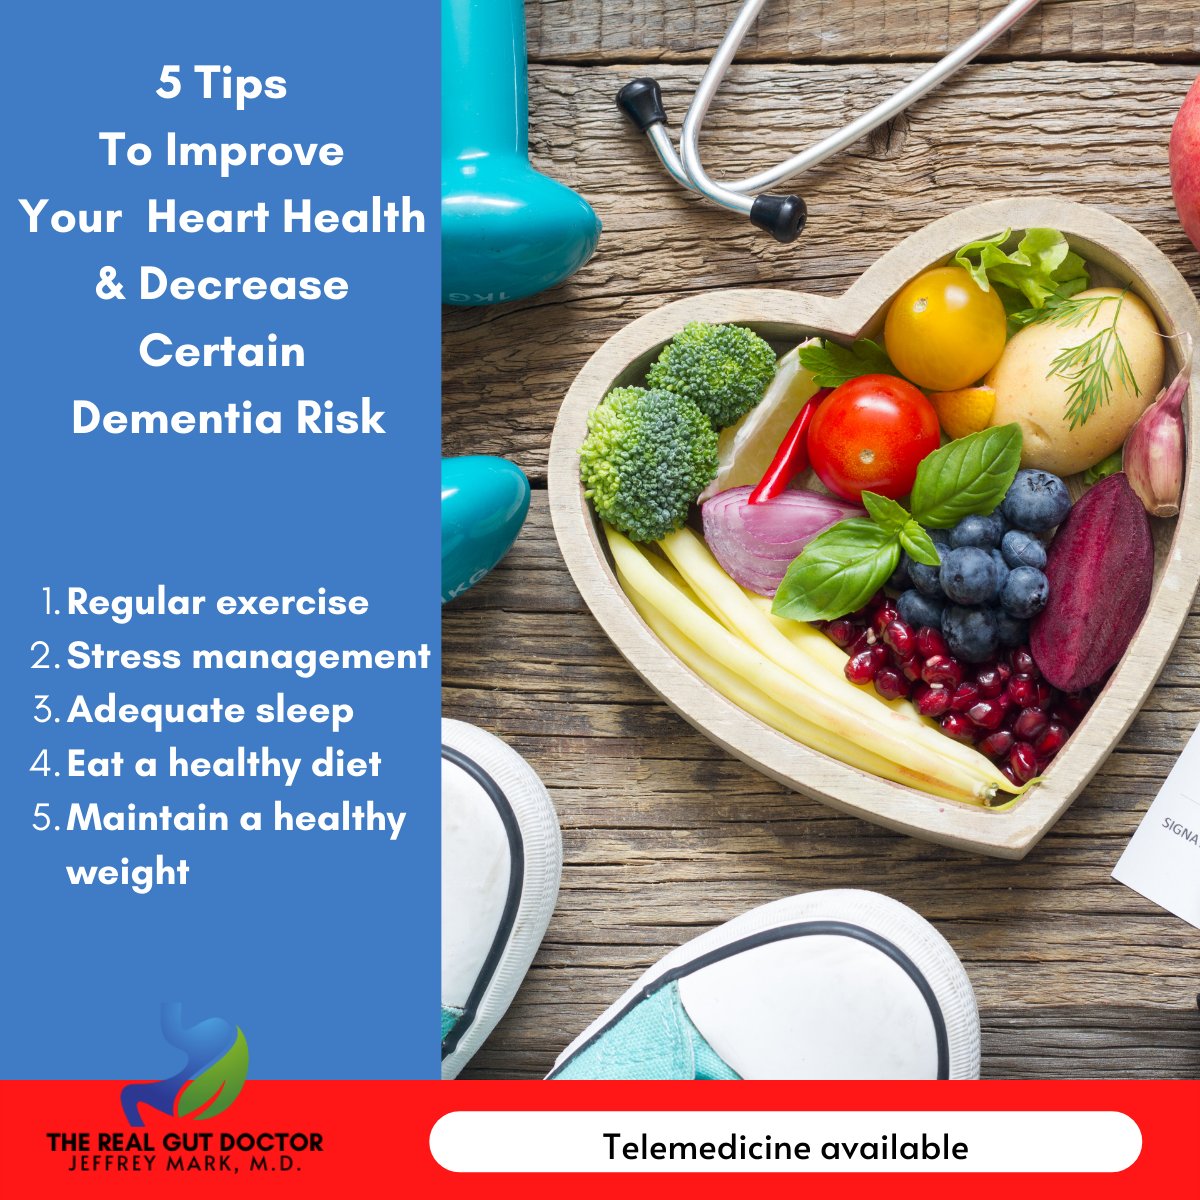 5 Top Health Tips from The Real Gut Doctor. #gut #health #hearthealthy #healthylifestyle #wellness #dementia #exercise #stress #sleep #diet #idealbodyweight #weightloss #healthyweight #drmark #therealgutdoctor